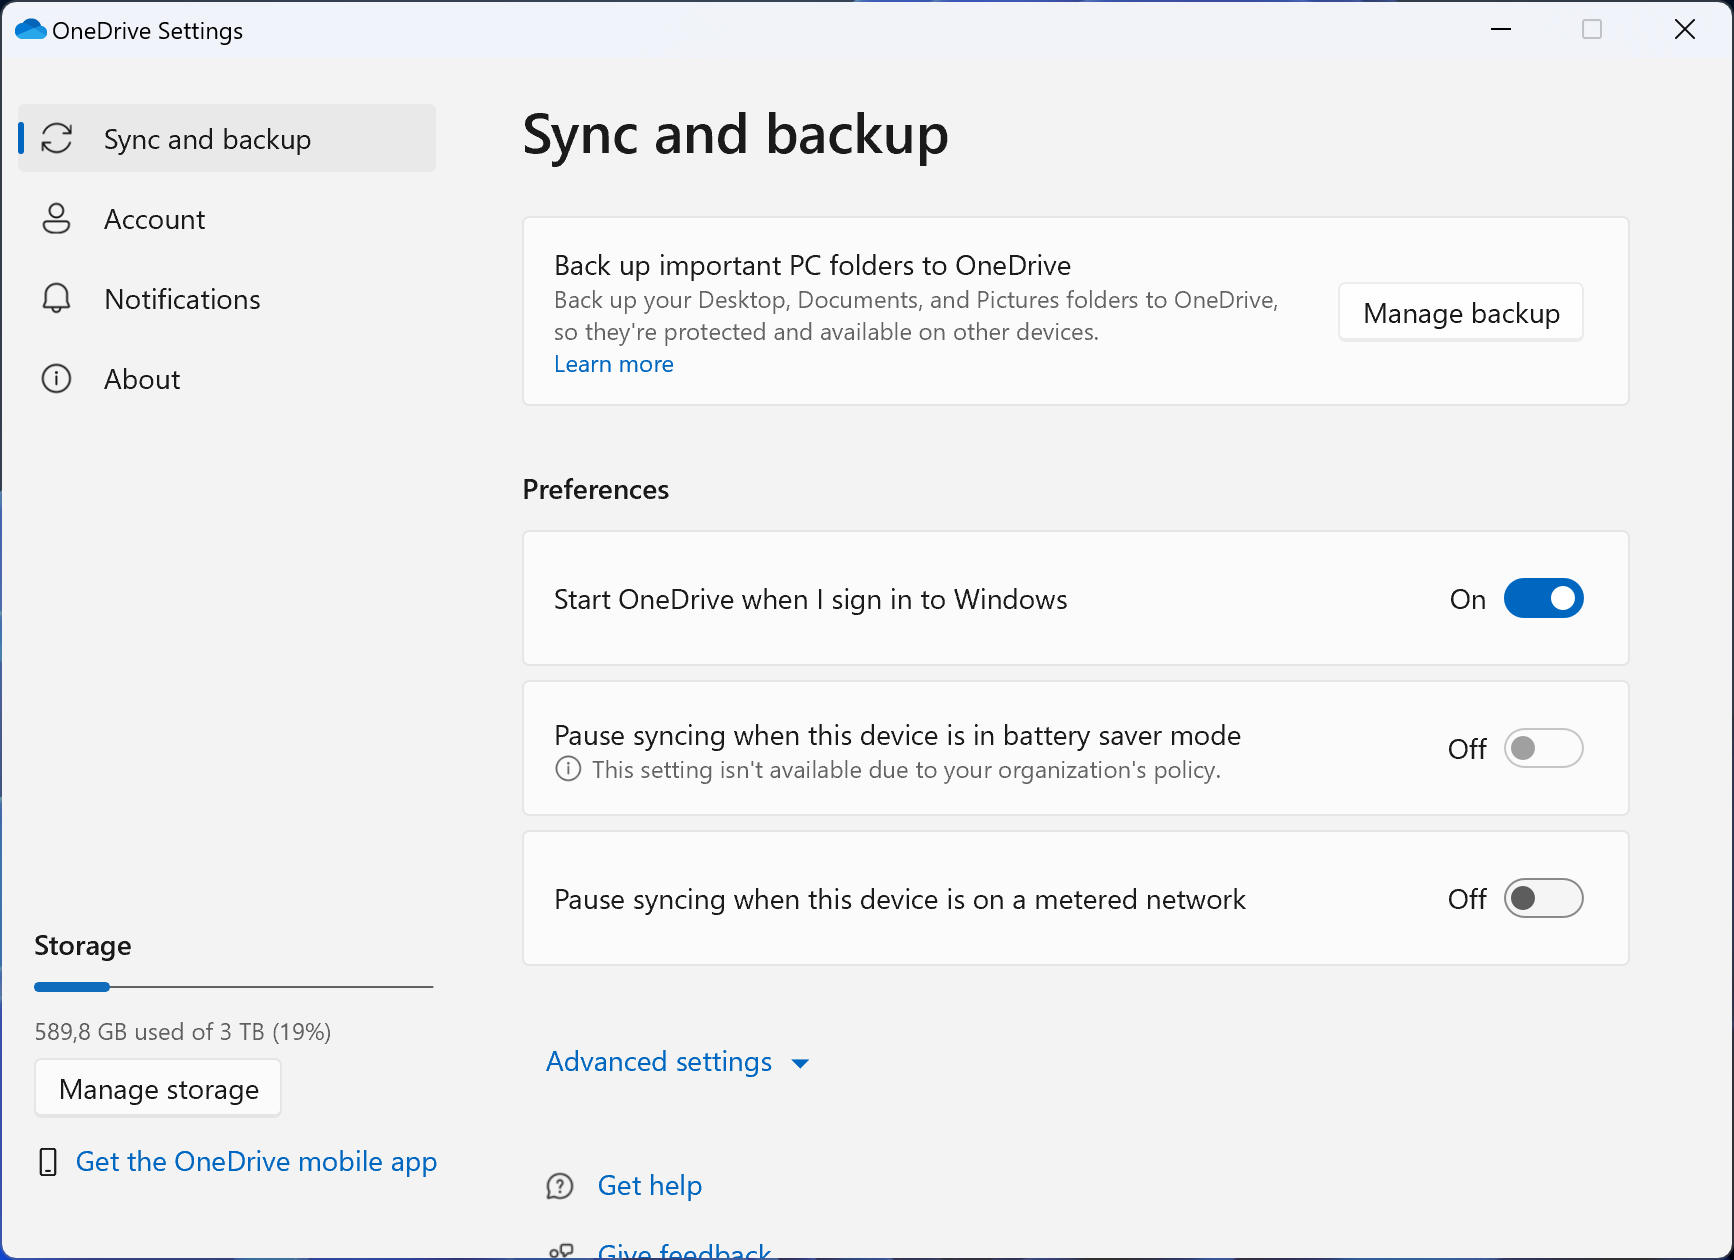 The image shows the OneDrive settings the user can choose from.